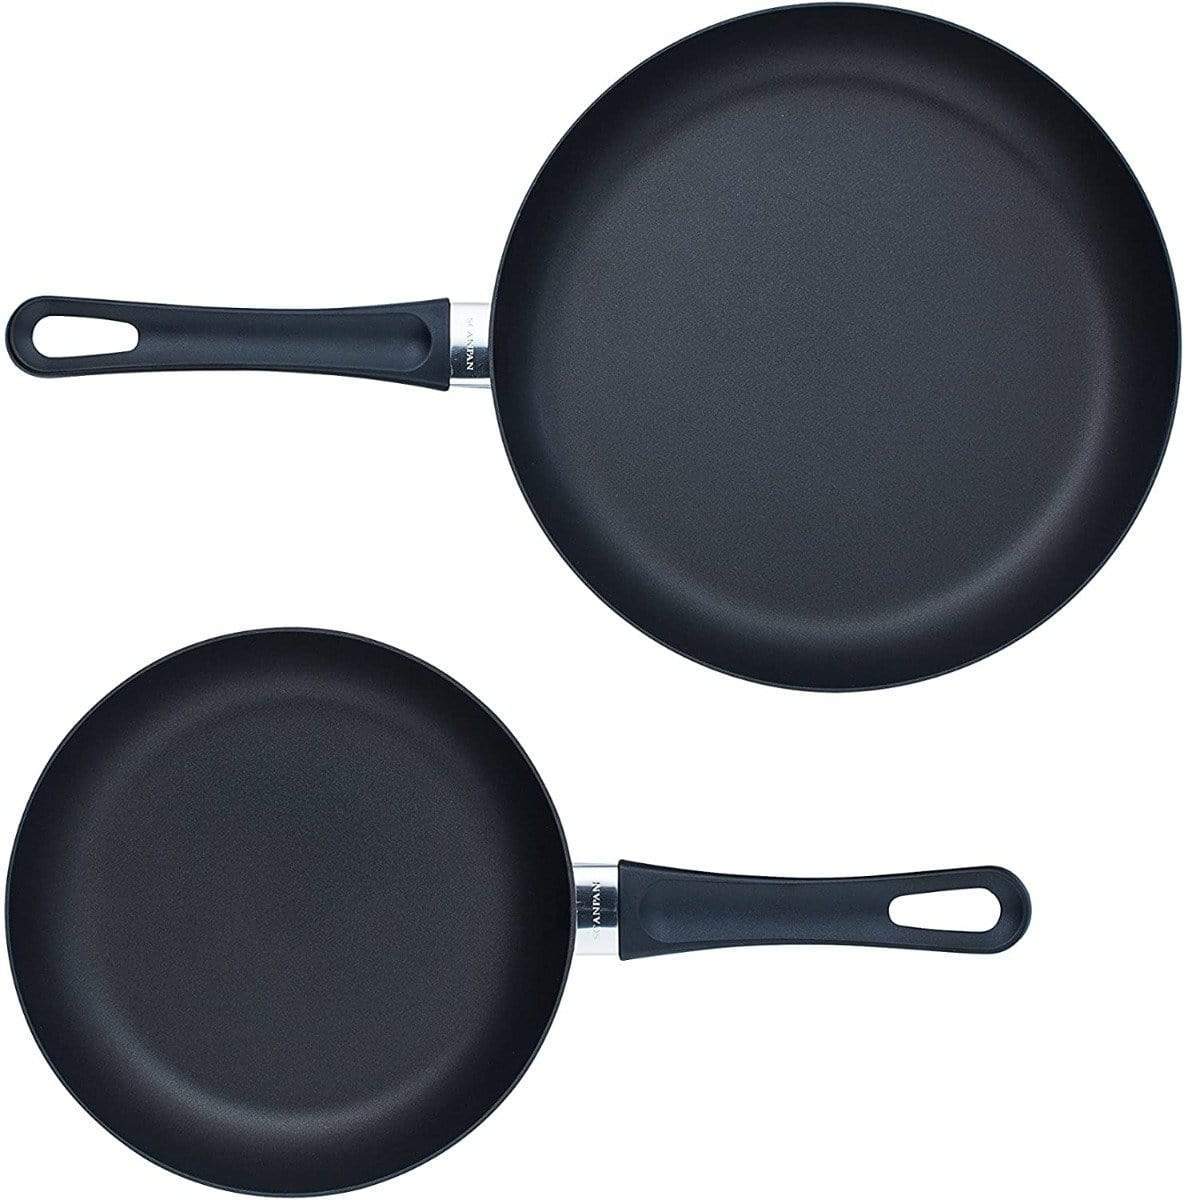 Kyocera 8-Inch Nonstick Ceramic Coated Fry Pan